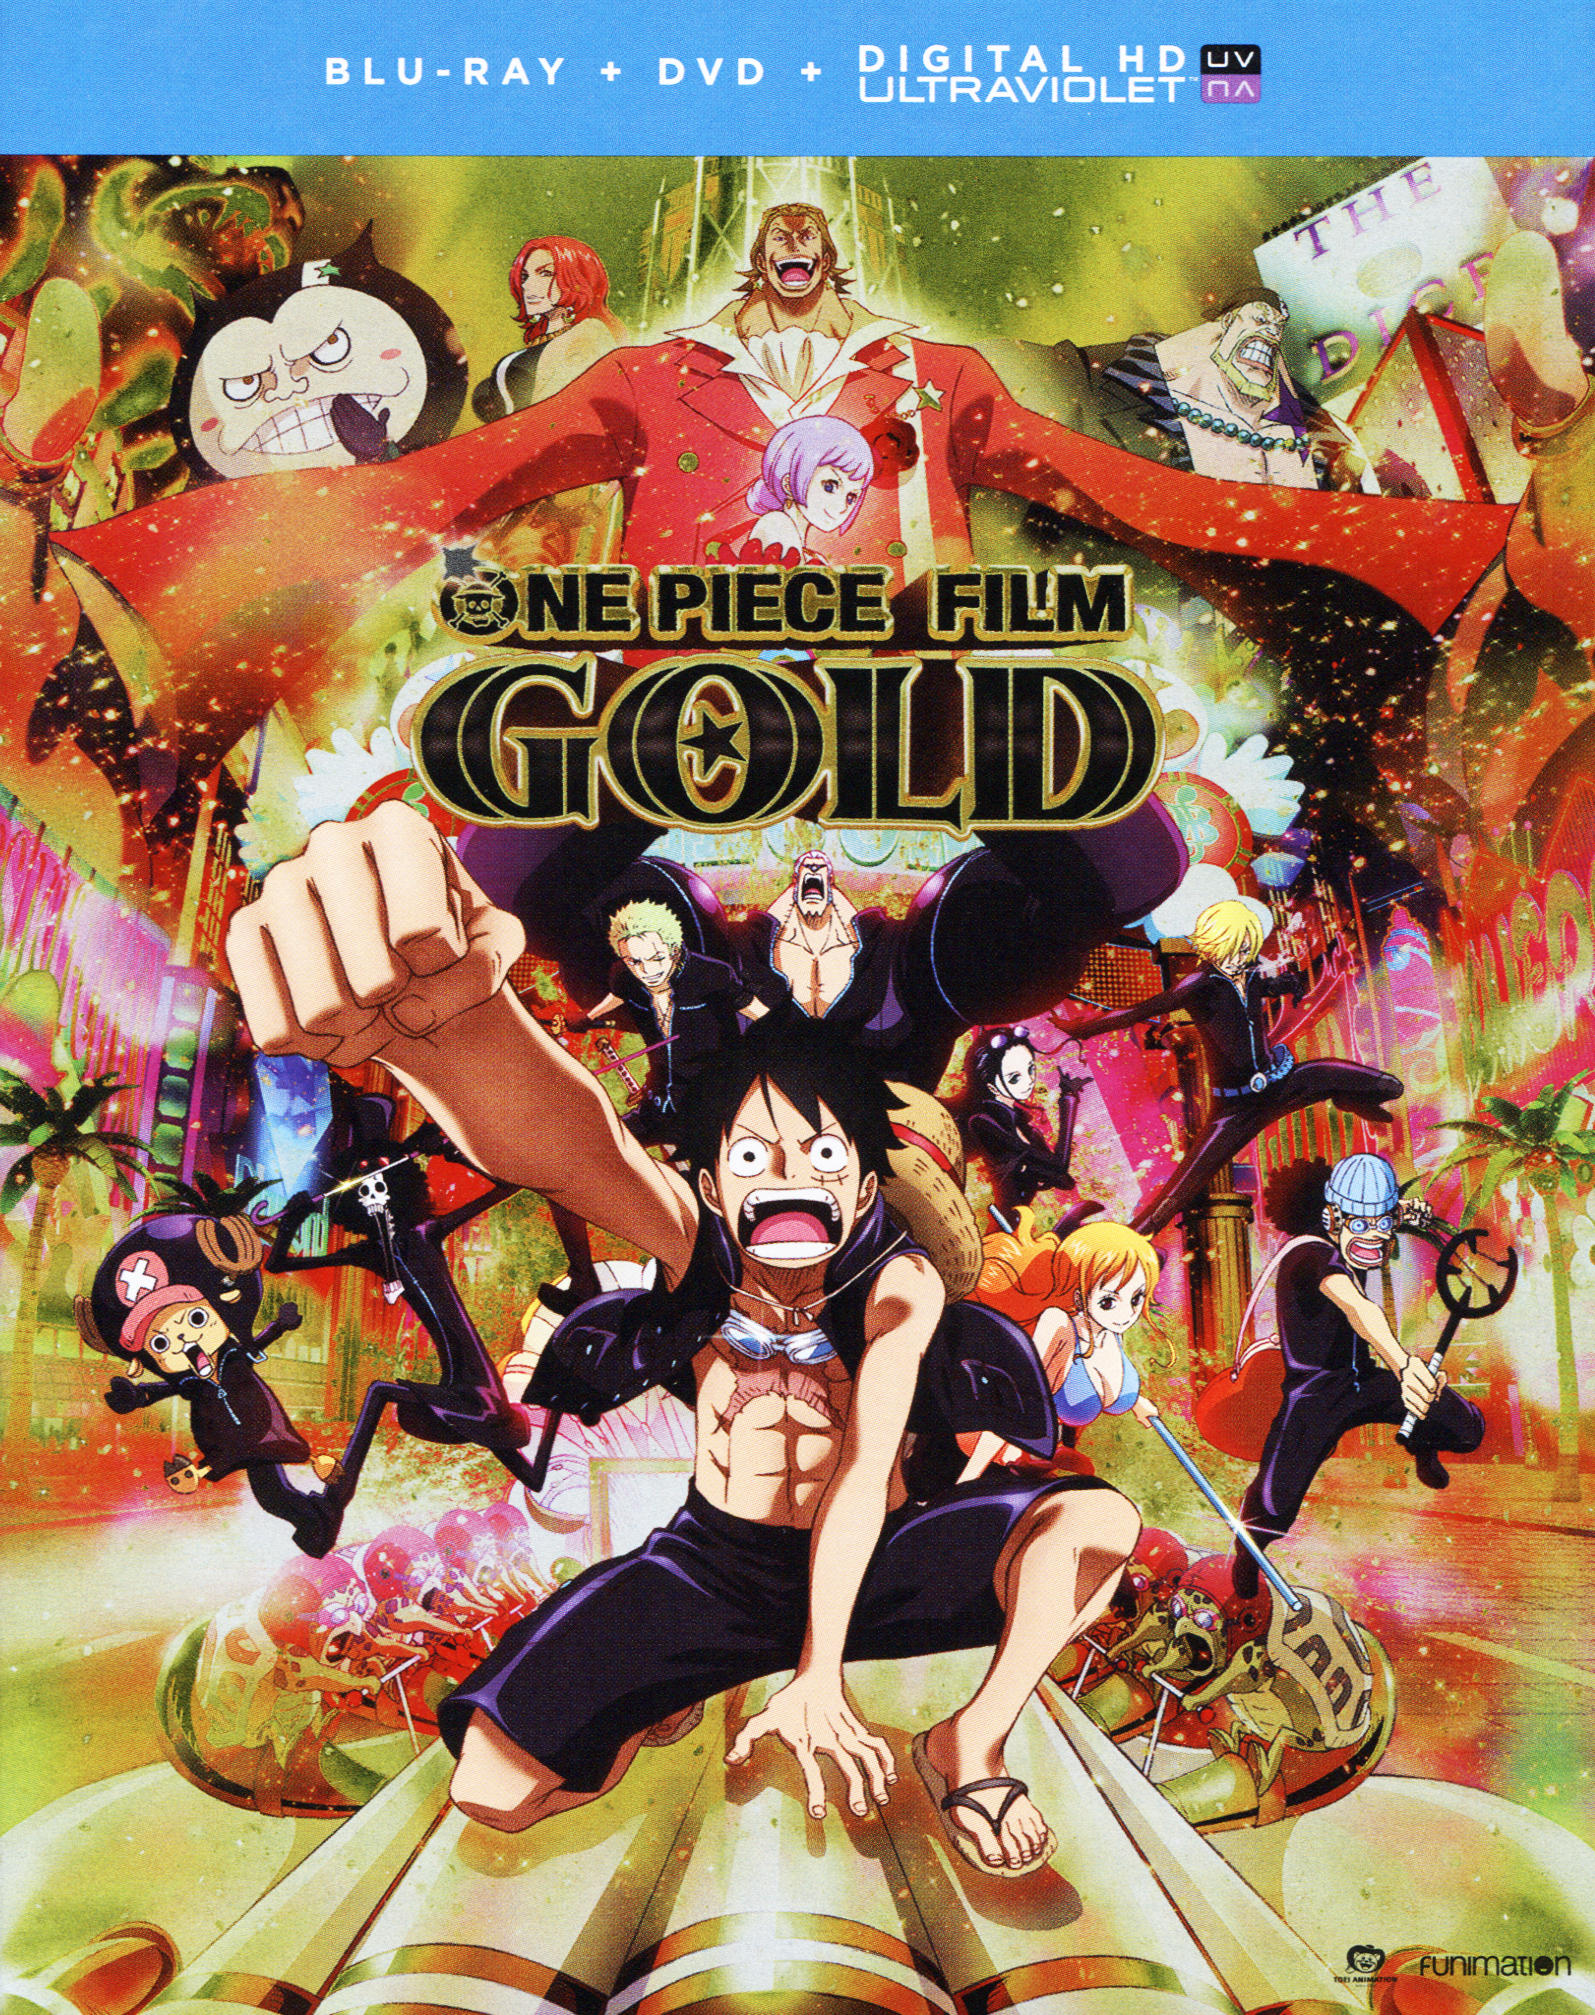 Prime Video: One Piece Film: Gold